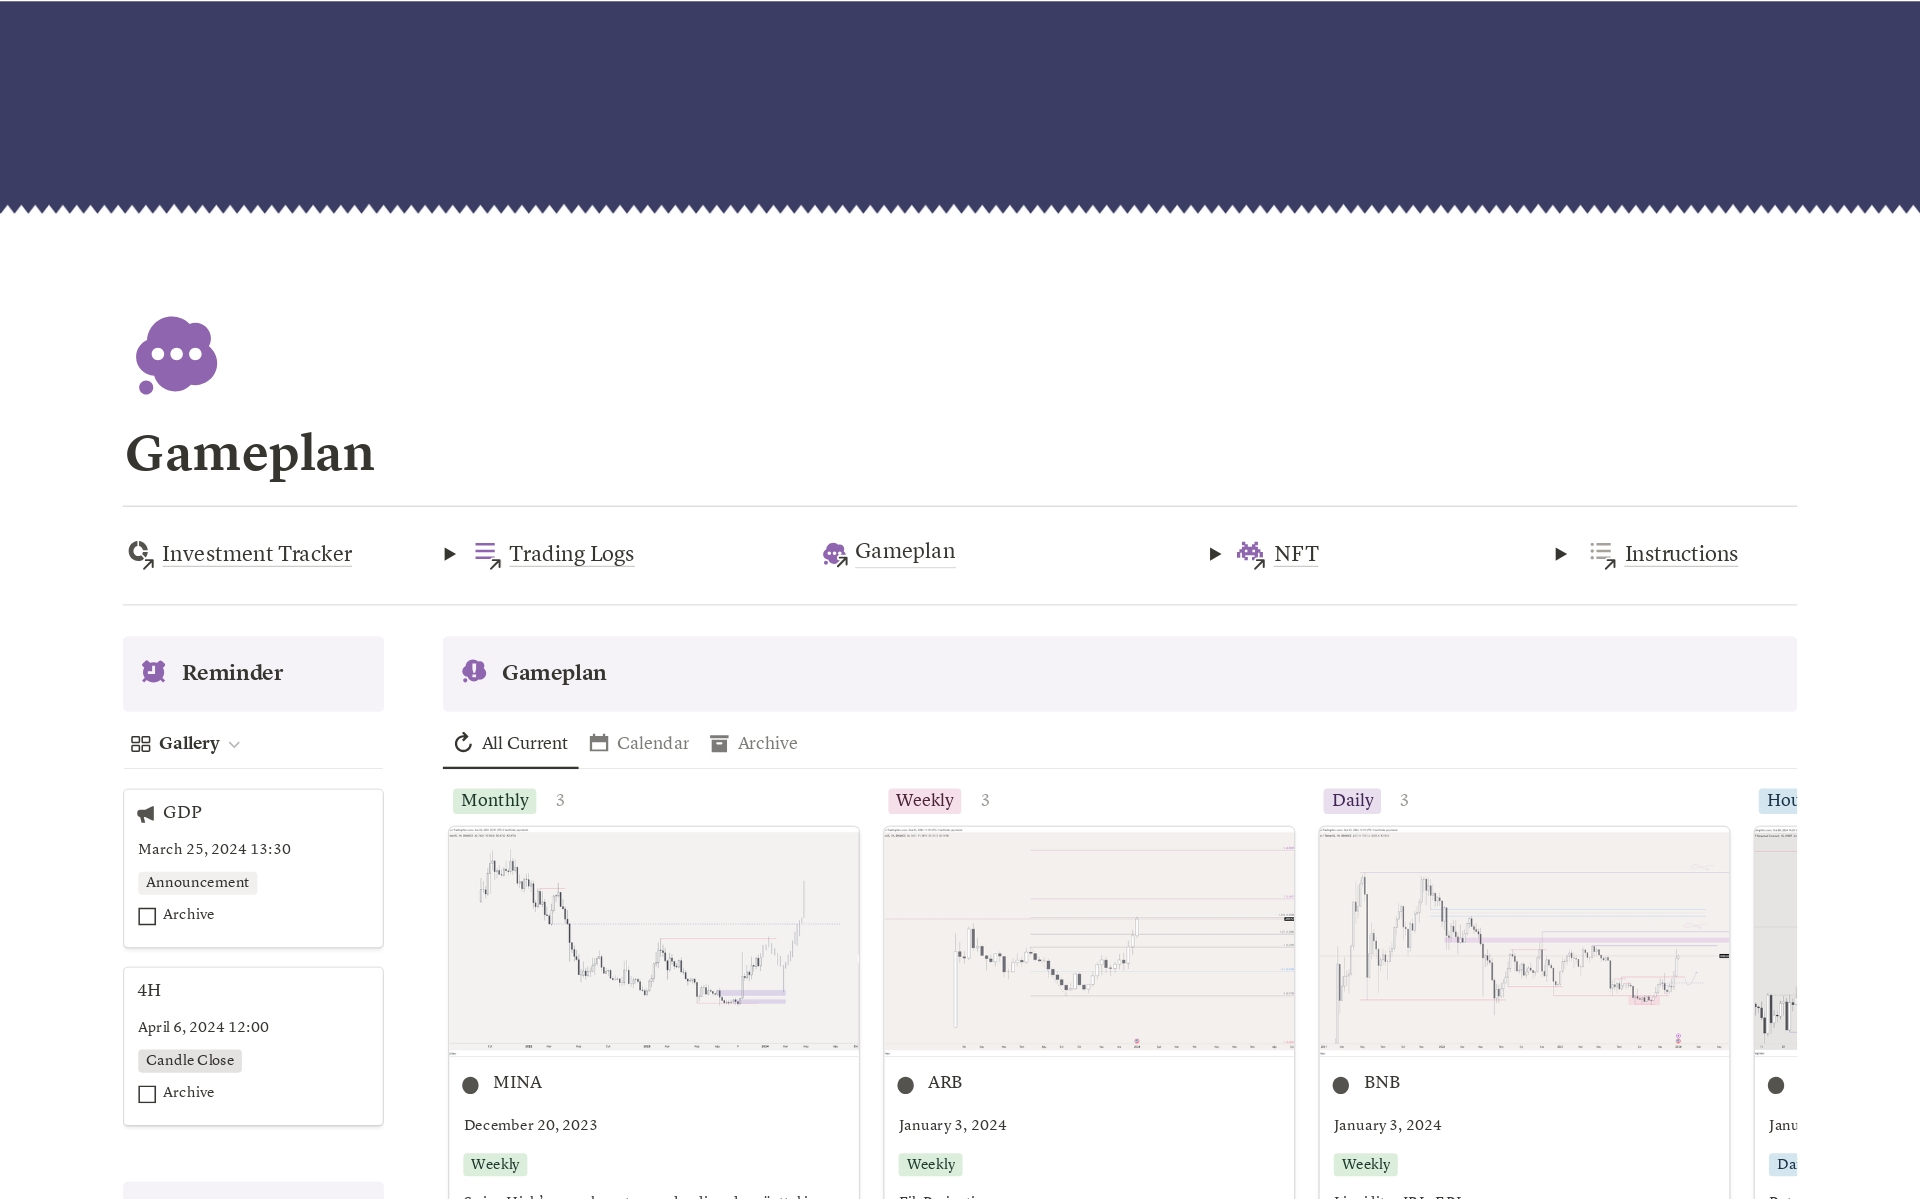 Track your investments / portfolio with this carefully created Notion template. Add your transactions, manage your positions, track your holdings with advanced Notion features. 
Bonus: NFT & Gem trackers.